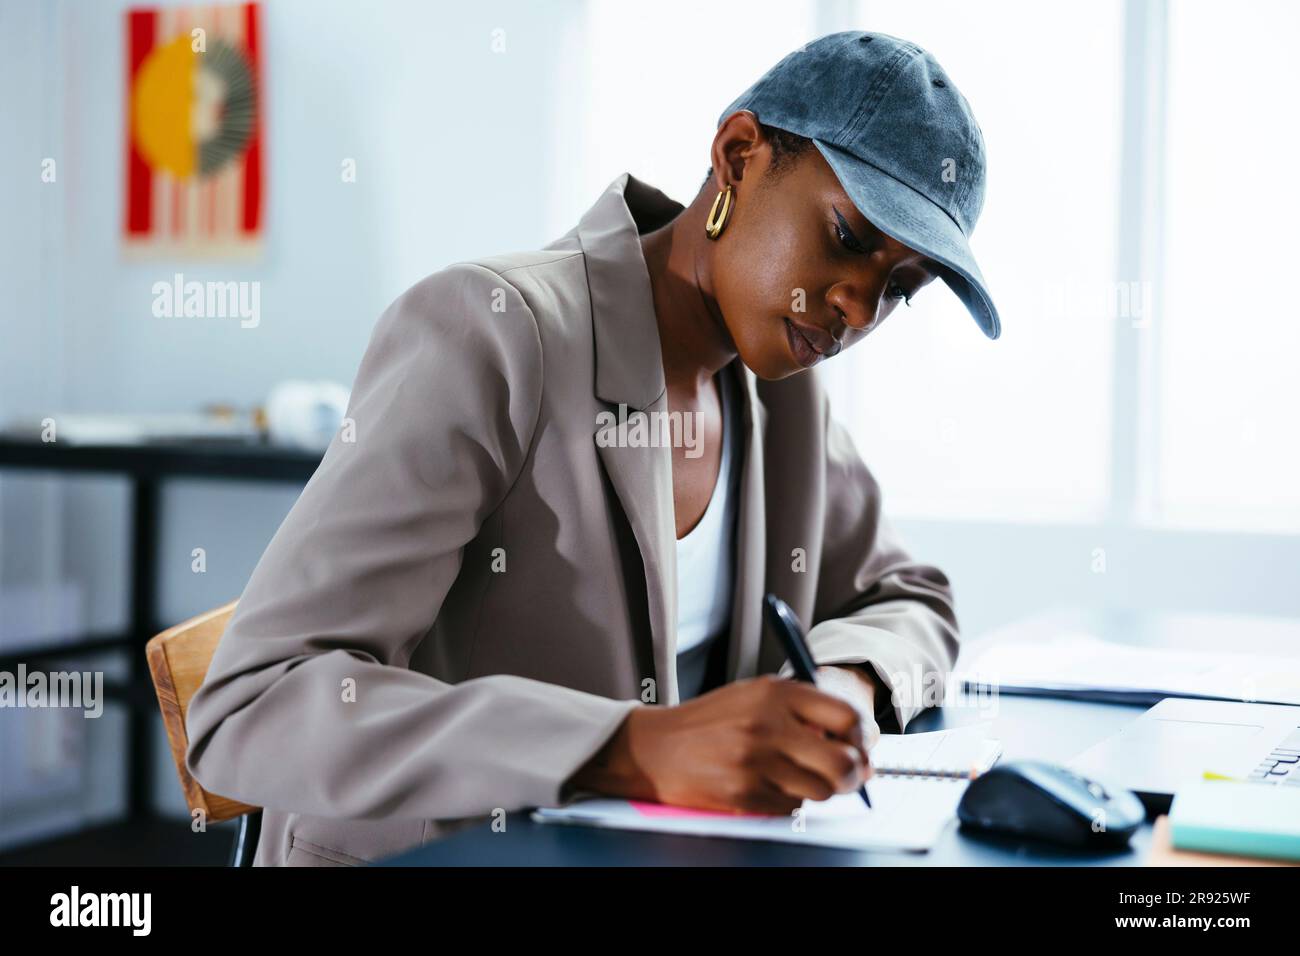 Freelancer wearing cap taking down notes at office Stock Photo